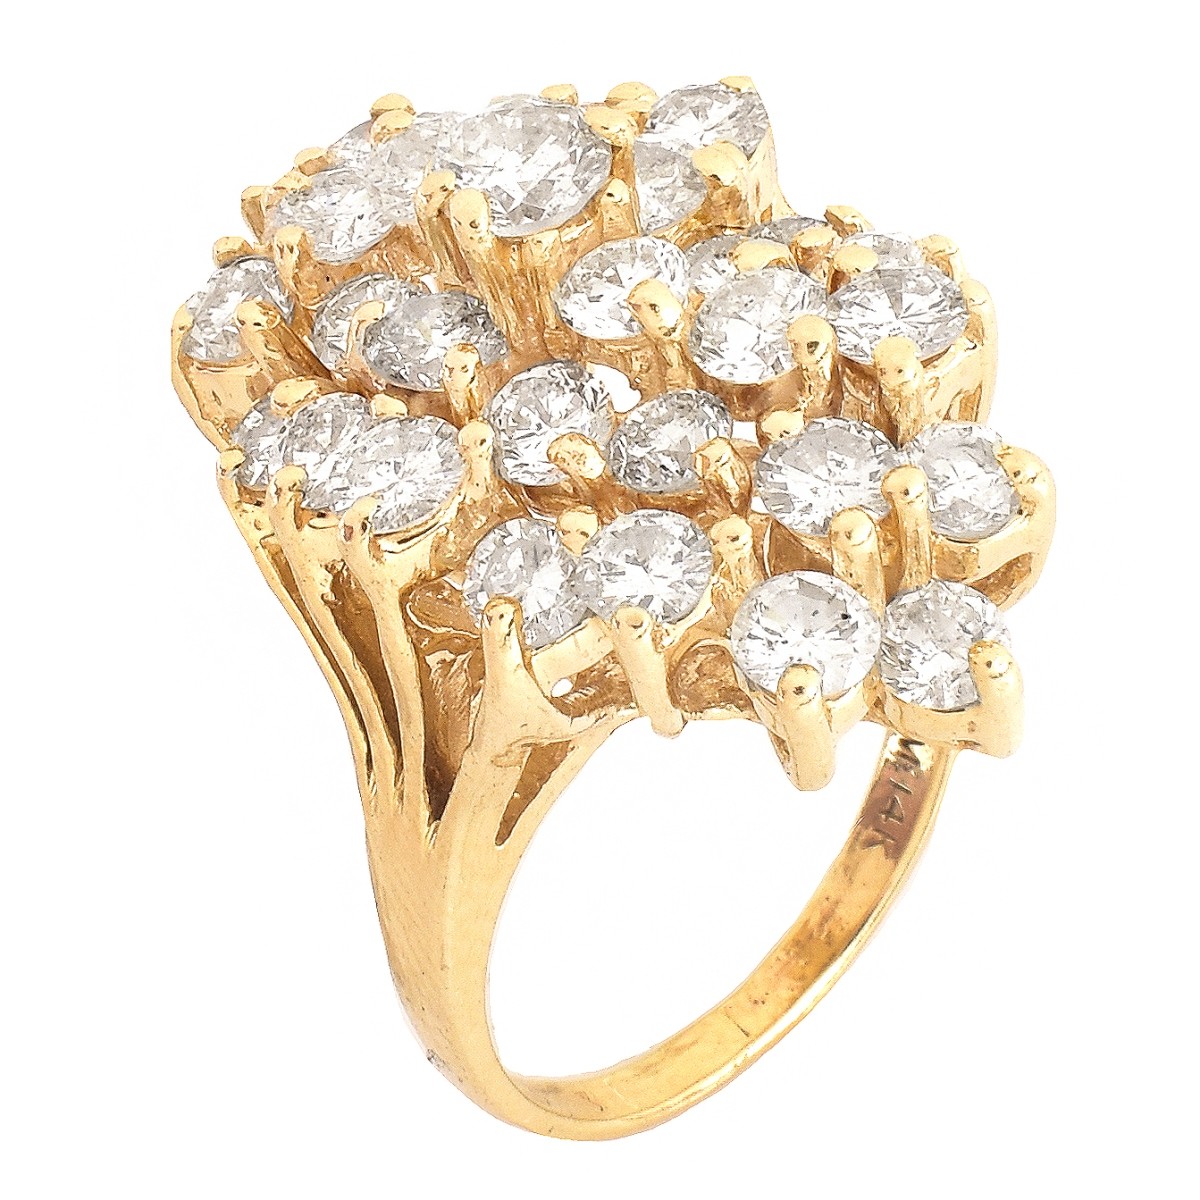 5.25ct TW Diamond and 14K Gold Cluster Ring